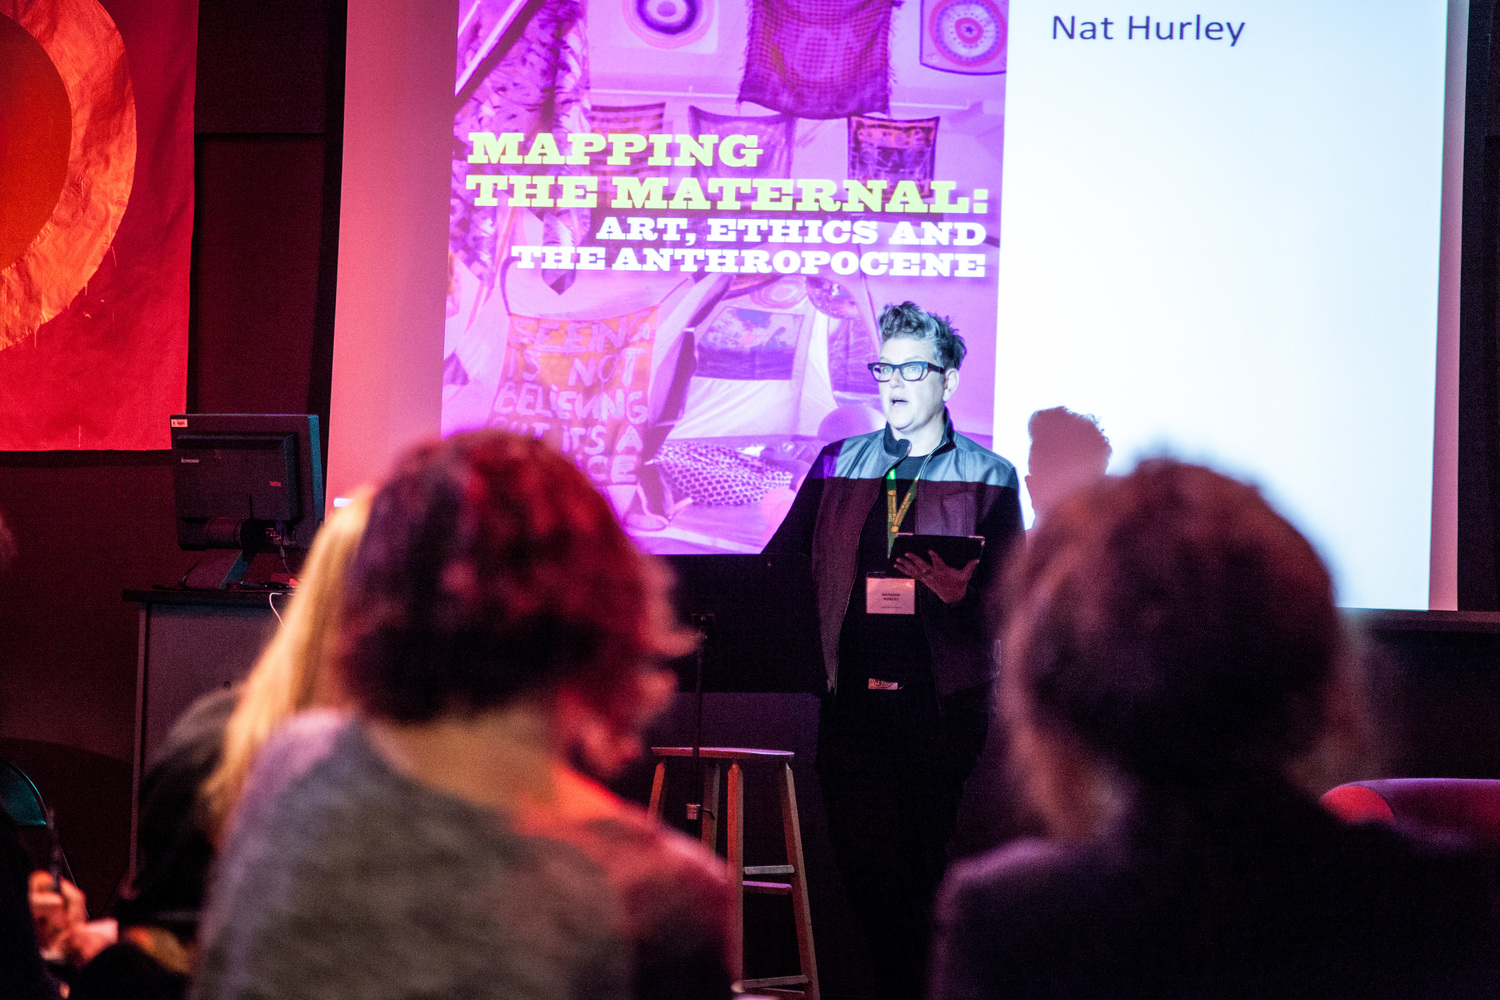  Nat Hurley “Is it possible to imagine maternity without motherhood?” 